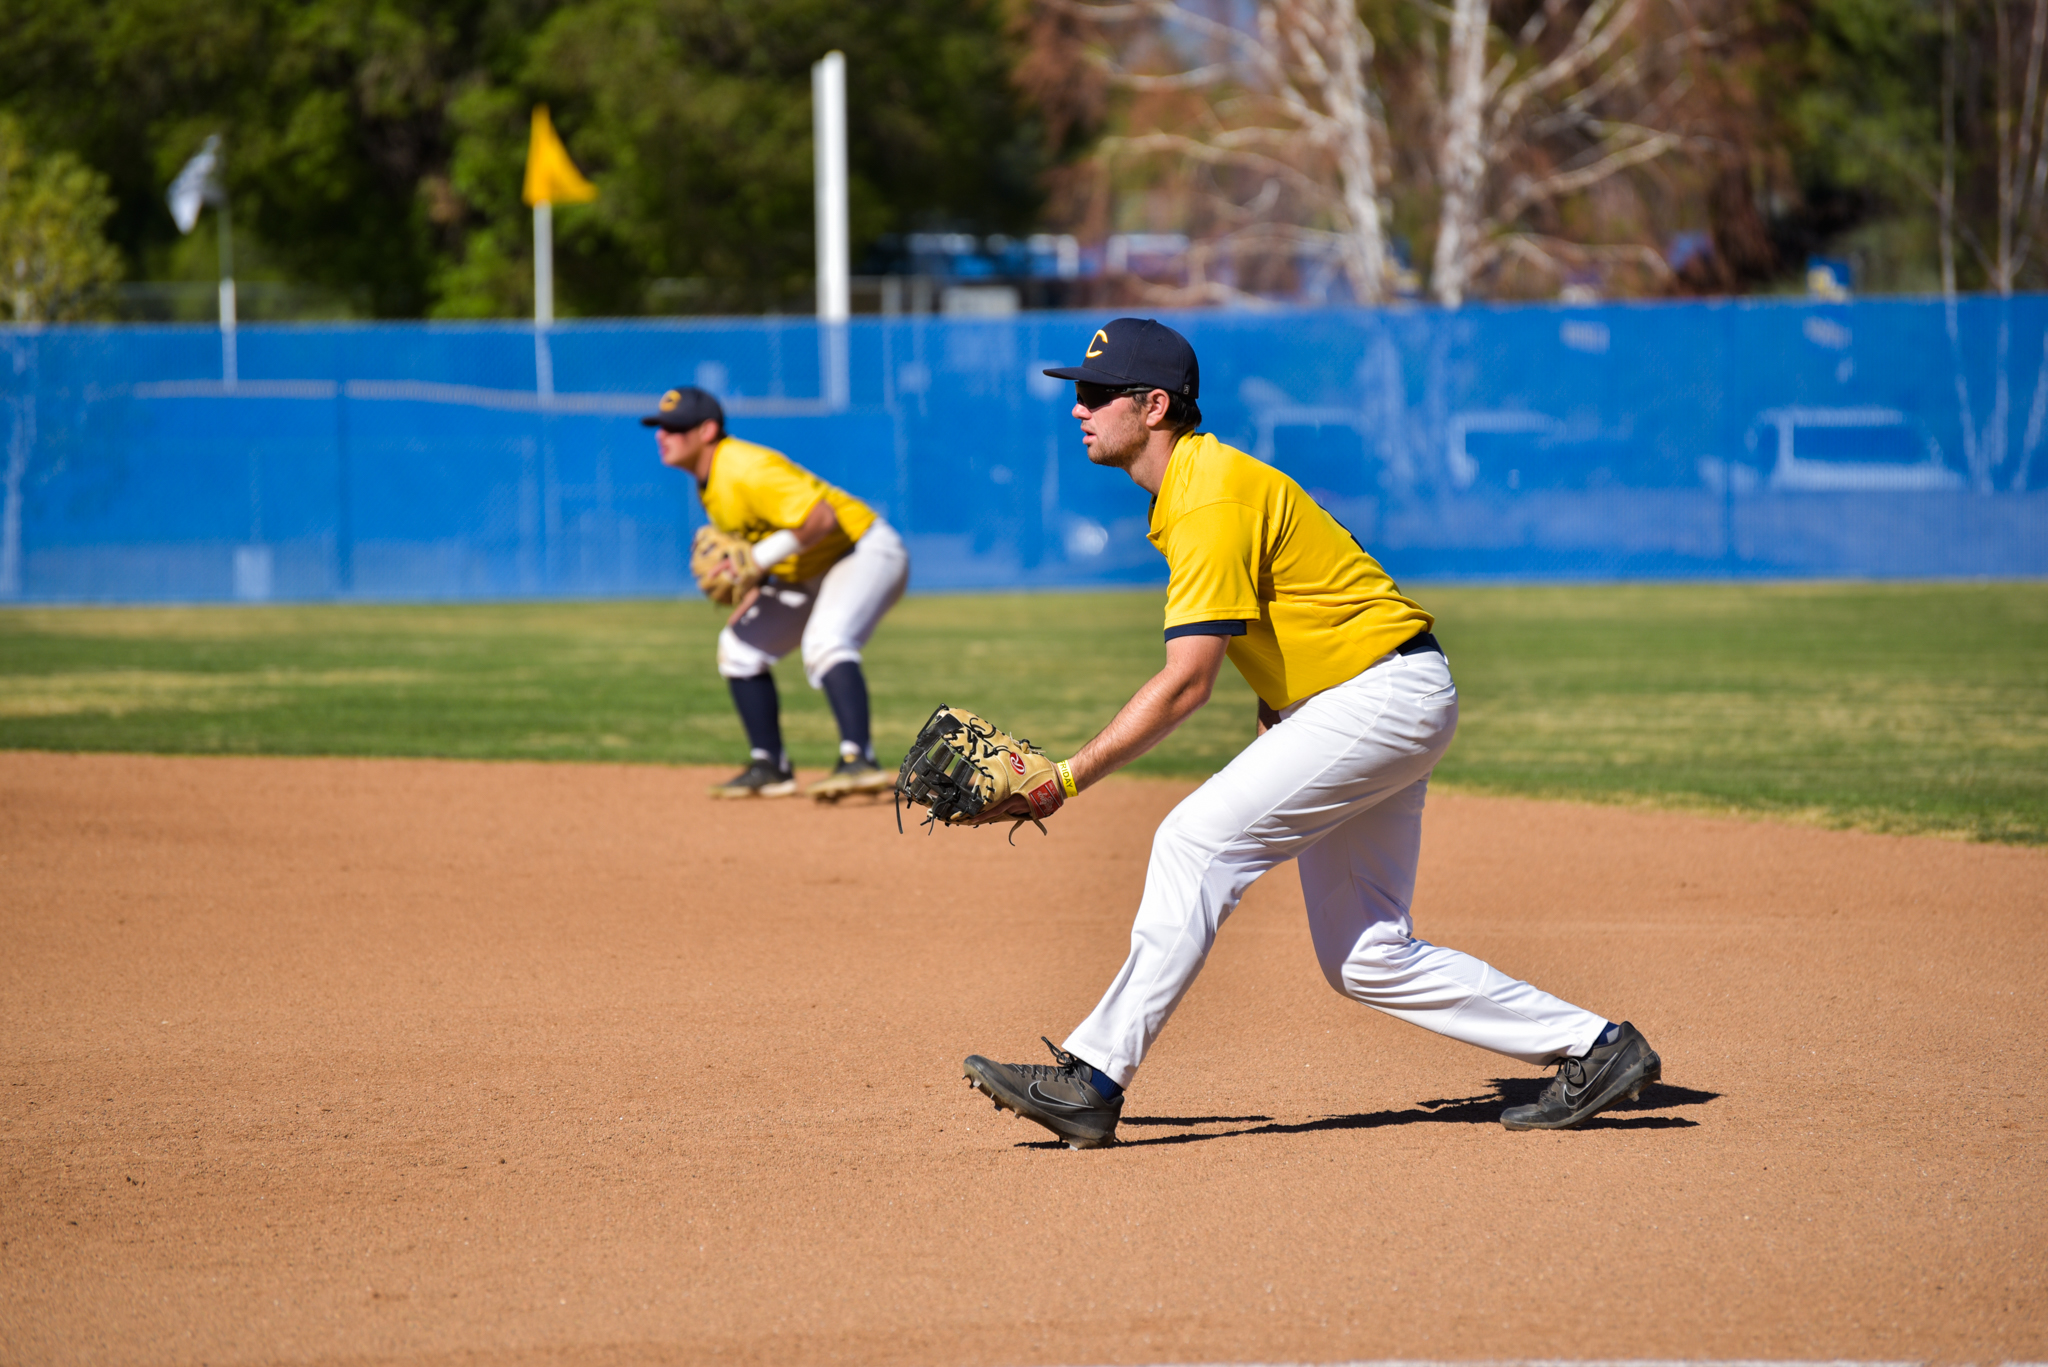 College of the Canyons baseball vs. Ventura College on Feb. 18, 2022.